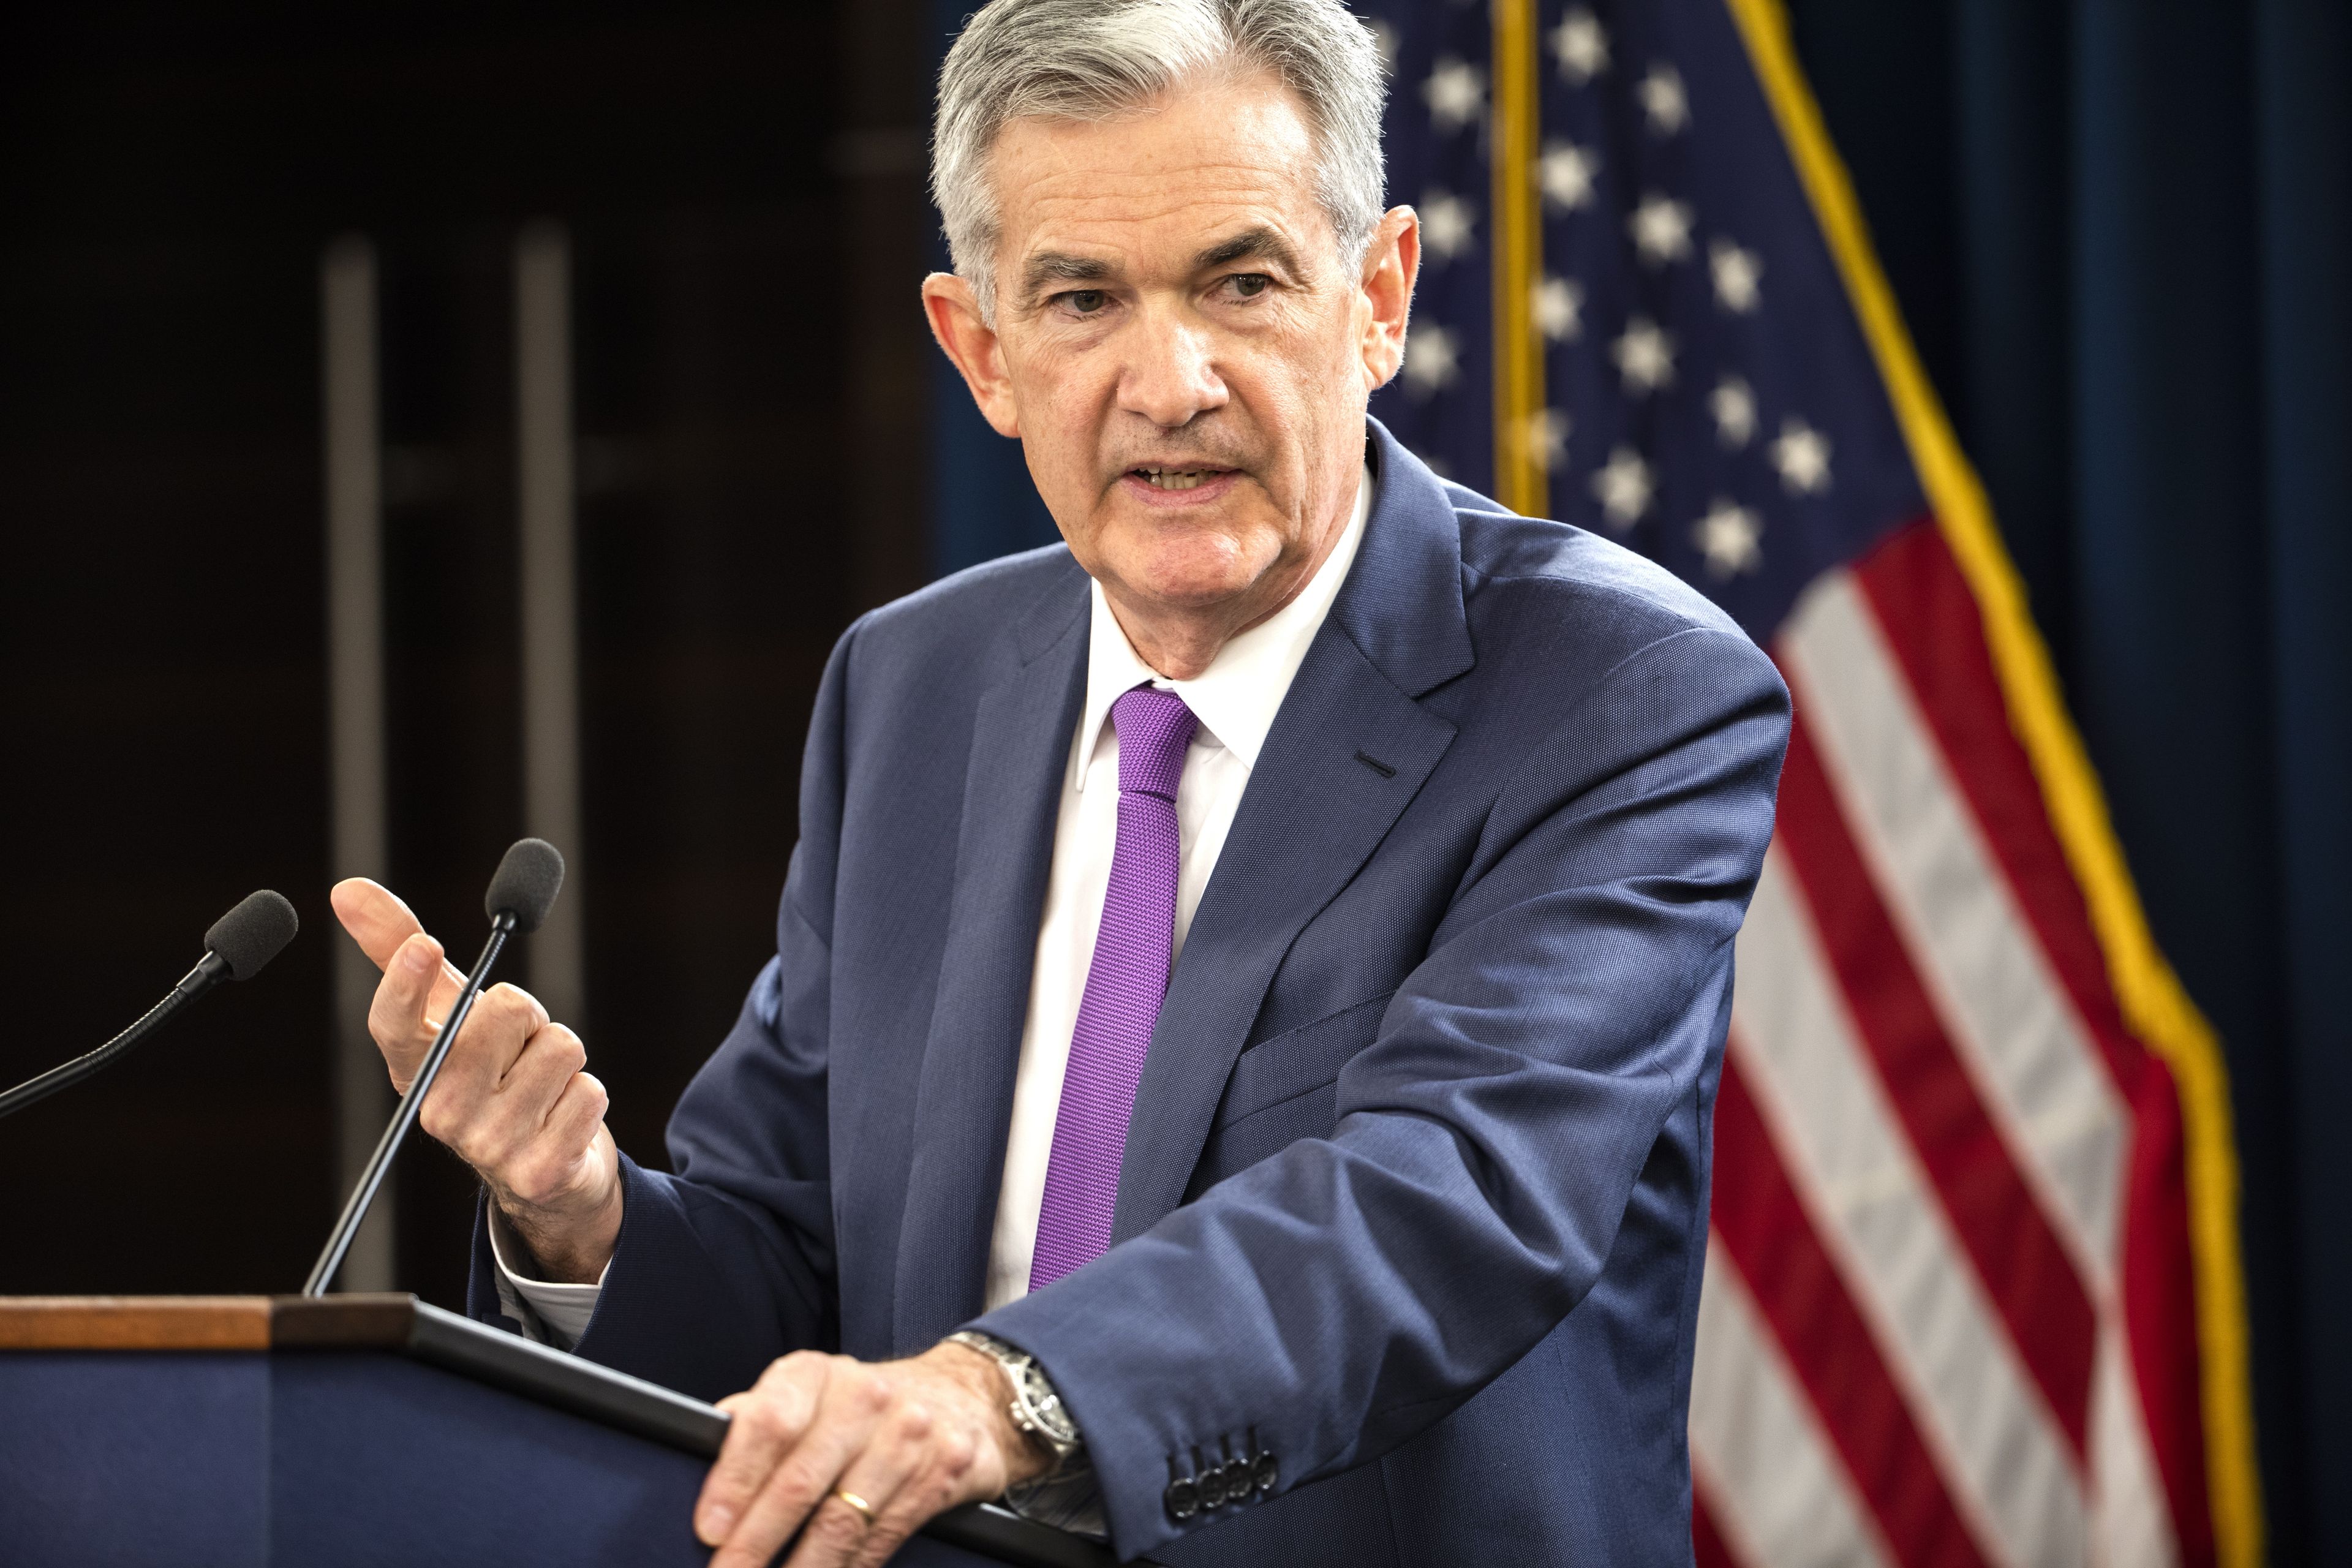 Federal Reserve Board Chairman Jerome Powell announces the Fed is raising interest rates